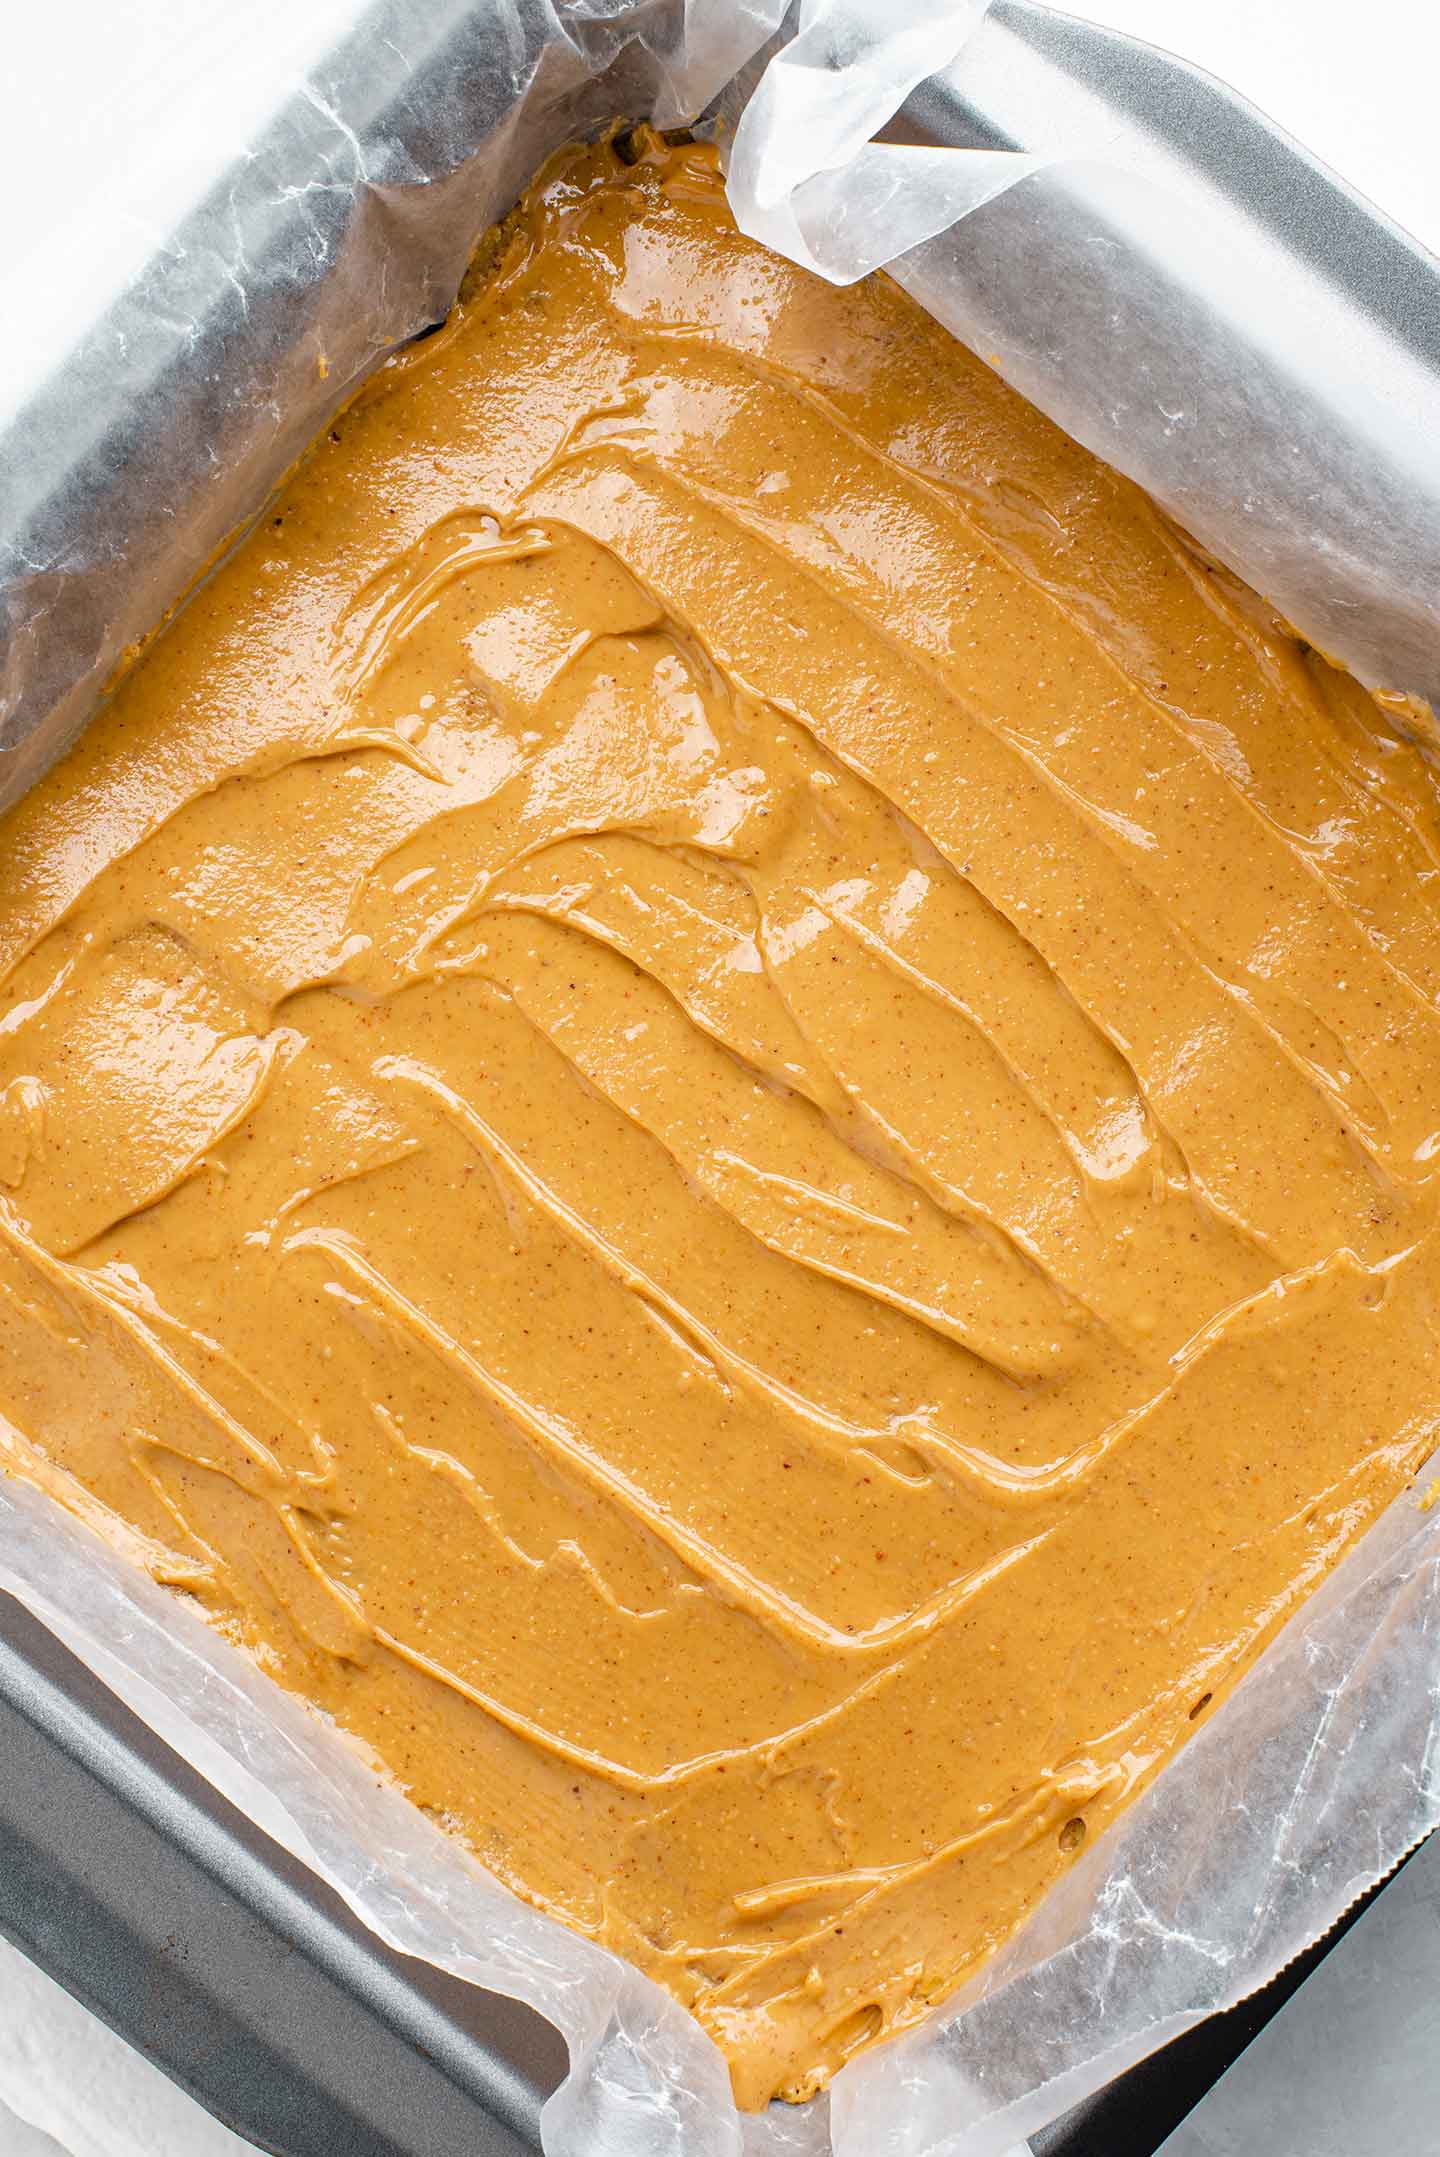 Top down view of peanut butter in a smooth layer on top of the base. The mixture is still in a wax paper lined baking tray.